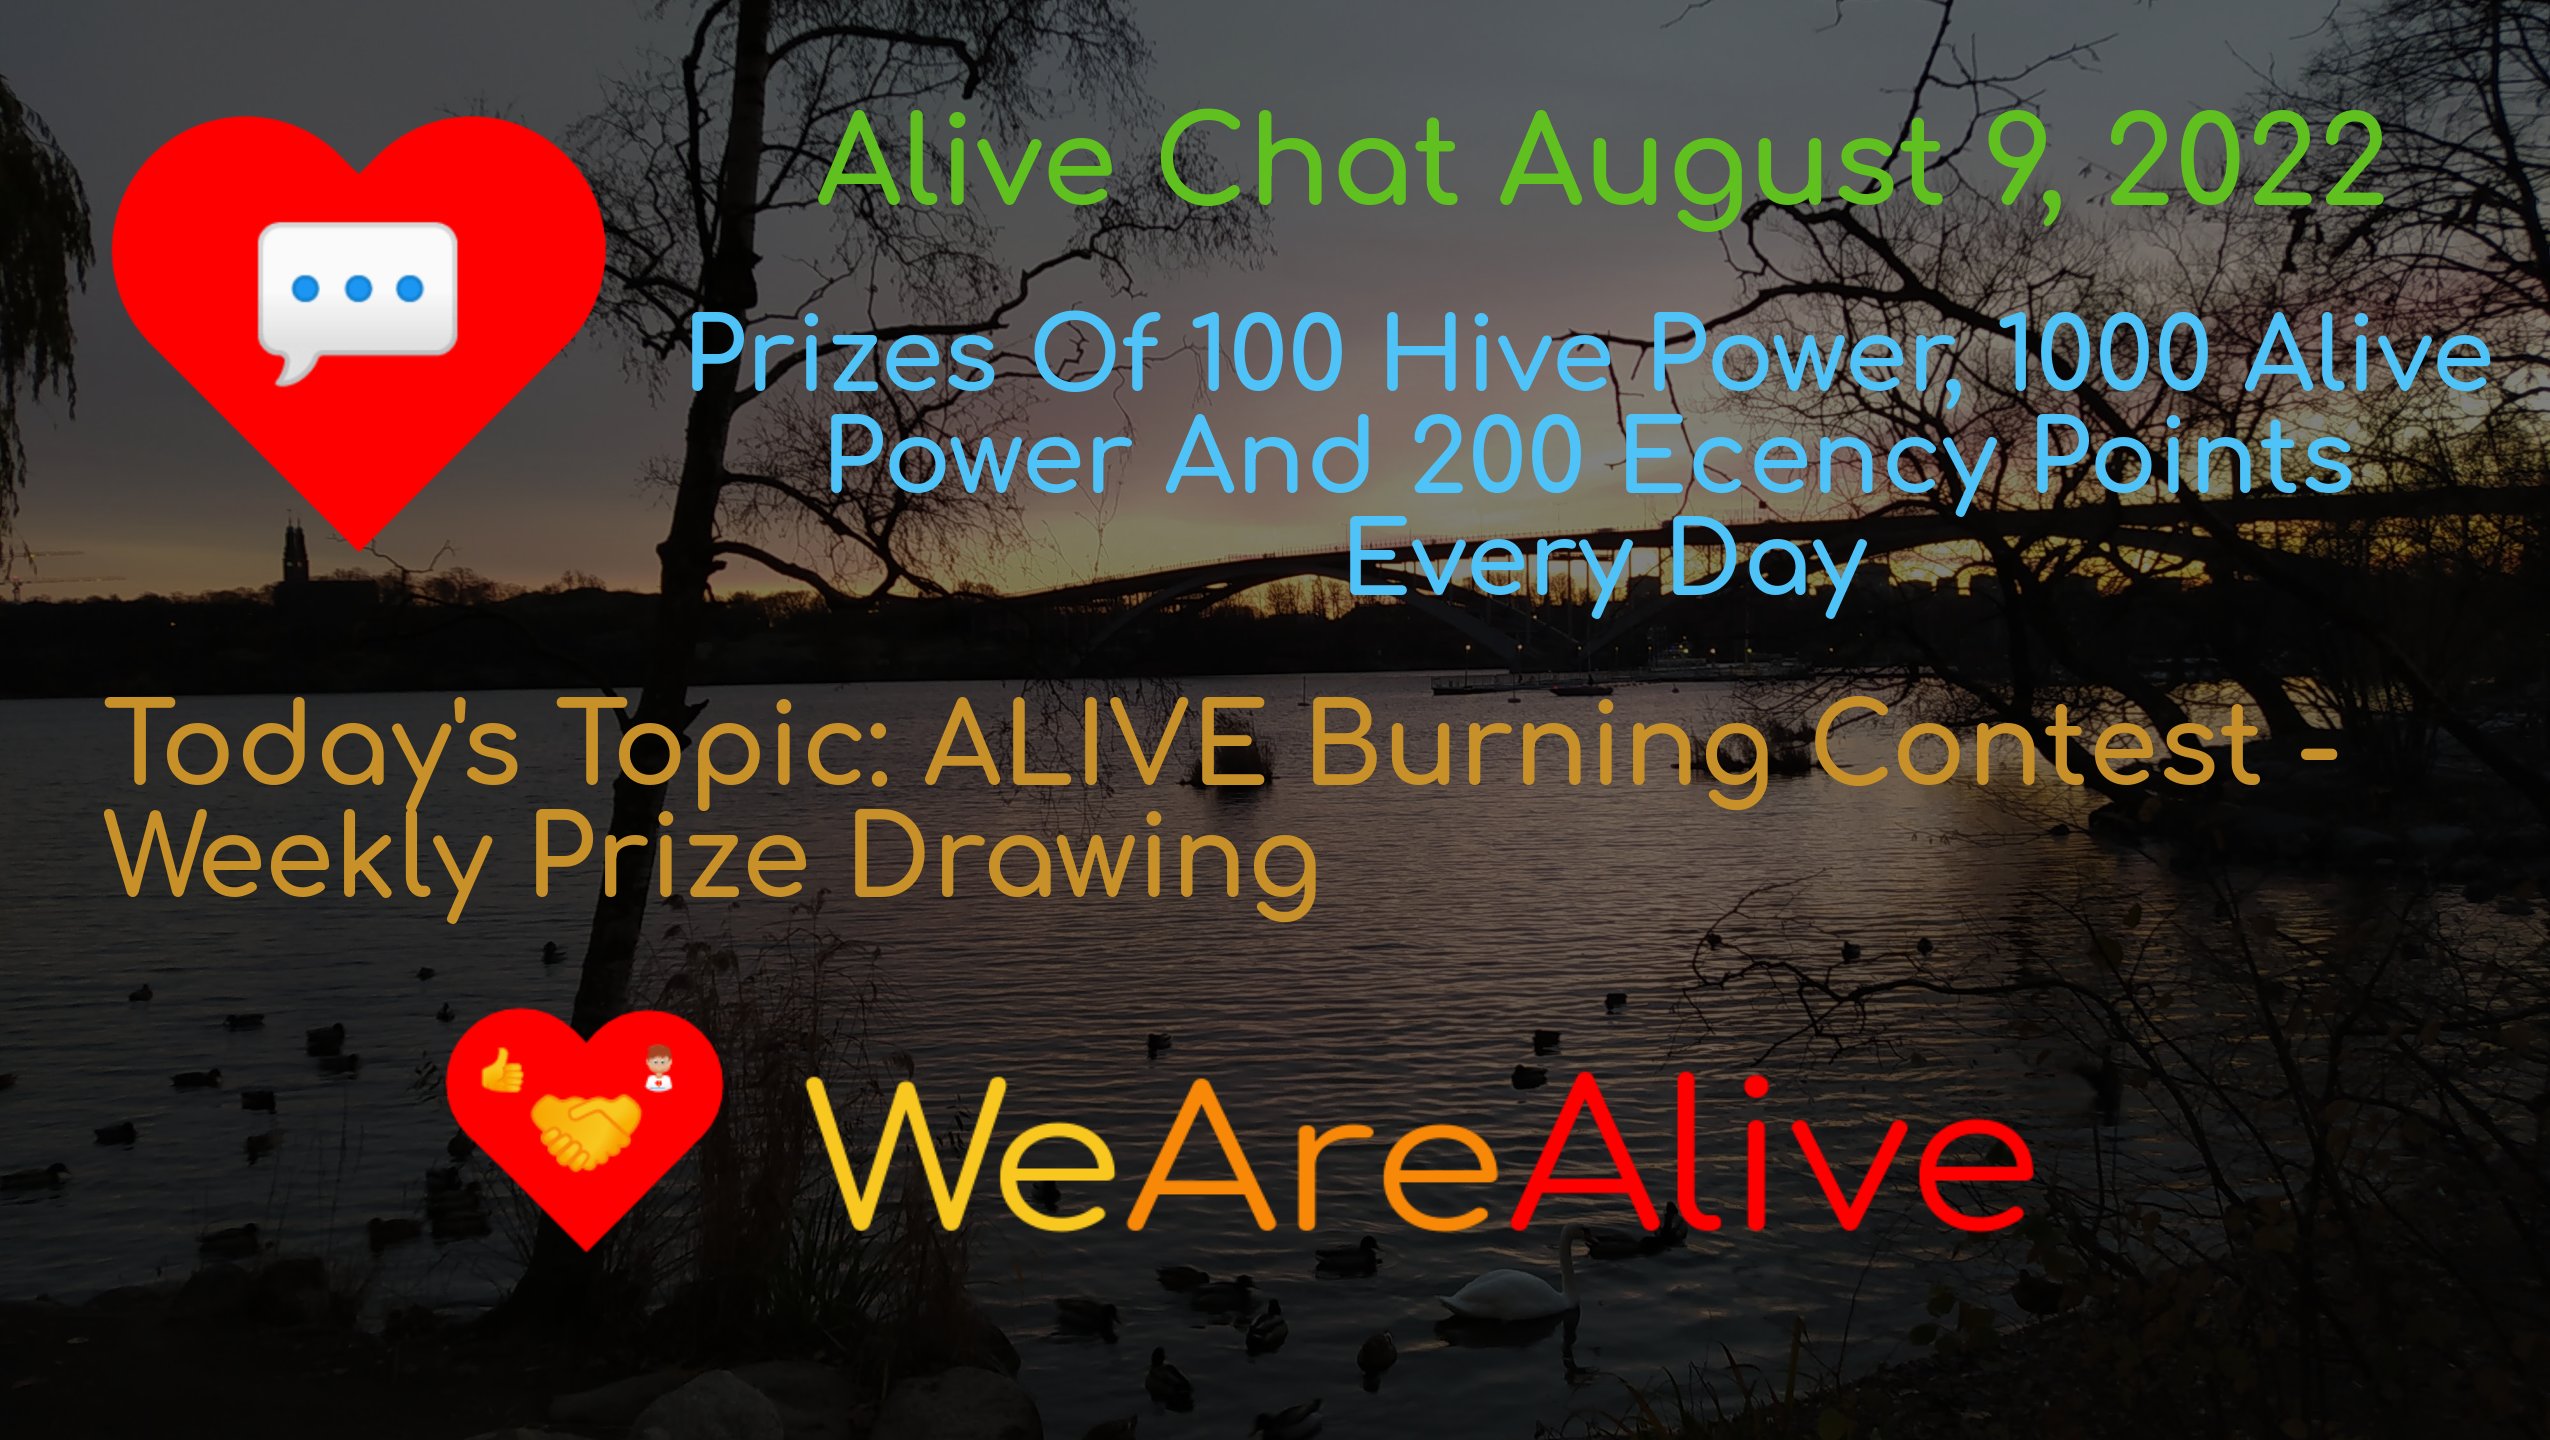 @alive.chat/alive-chat-august-9-2022-daily-prize-drawing-open-for-entries-todays-topic-alive-burning-contest-weekly-prize-drawing